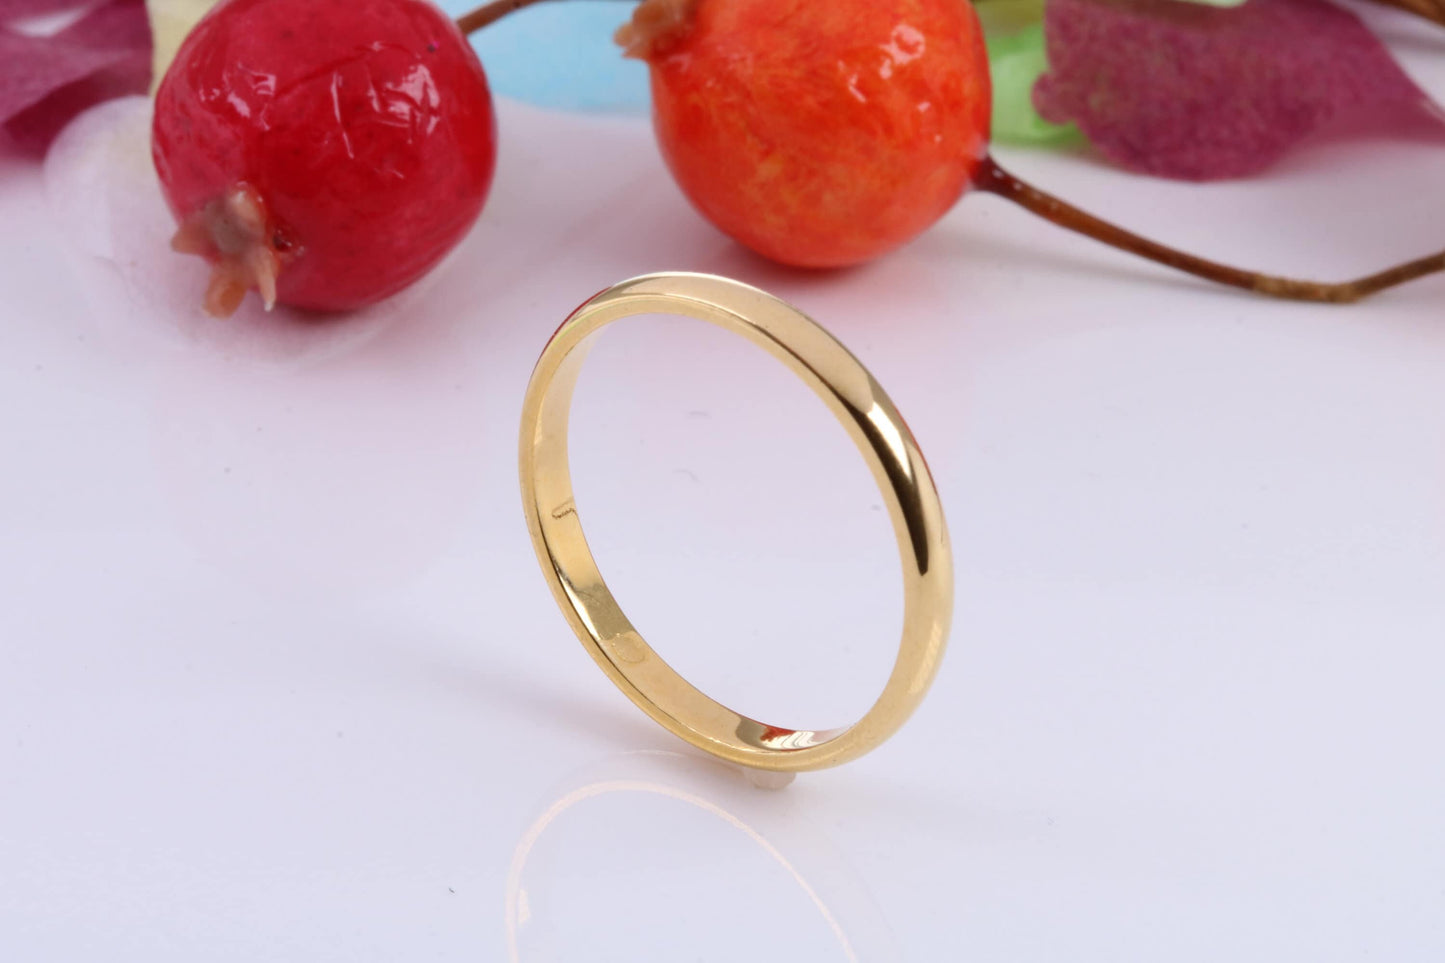 2 mm wide Simple Band, D Profile, Made from Solid Silver and Further 18ct Yellow Gold Plated